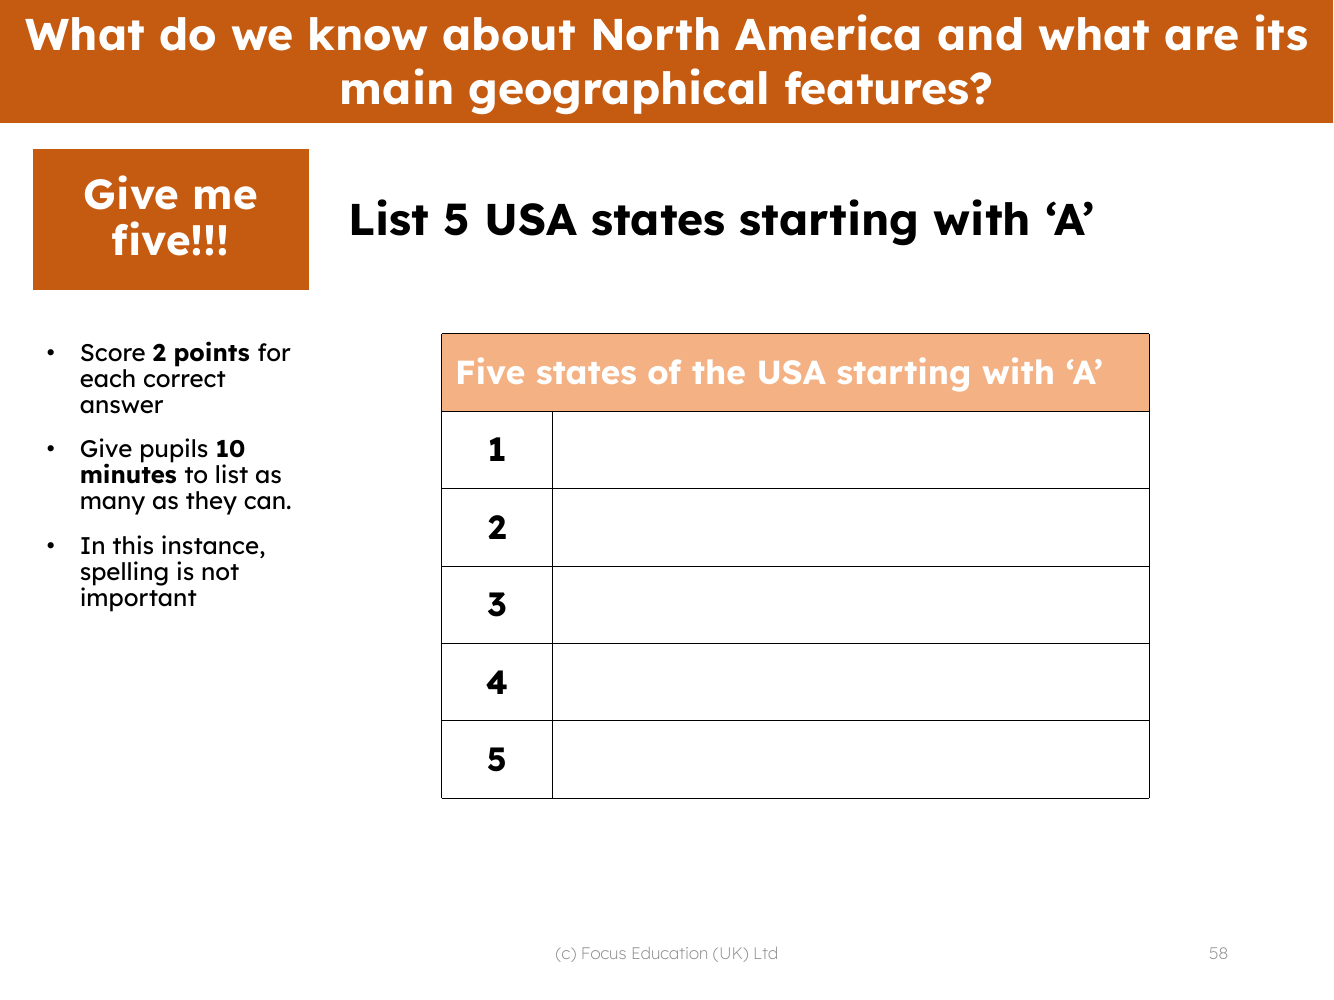 Give me 5 - USA states beginning with 'A'